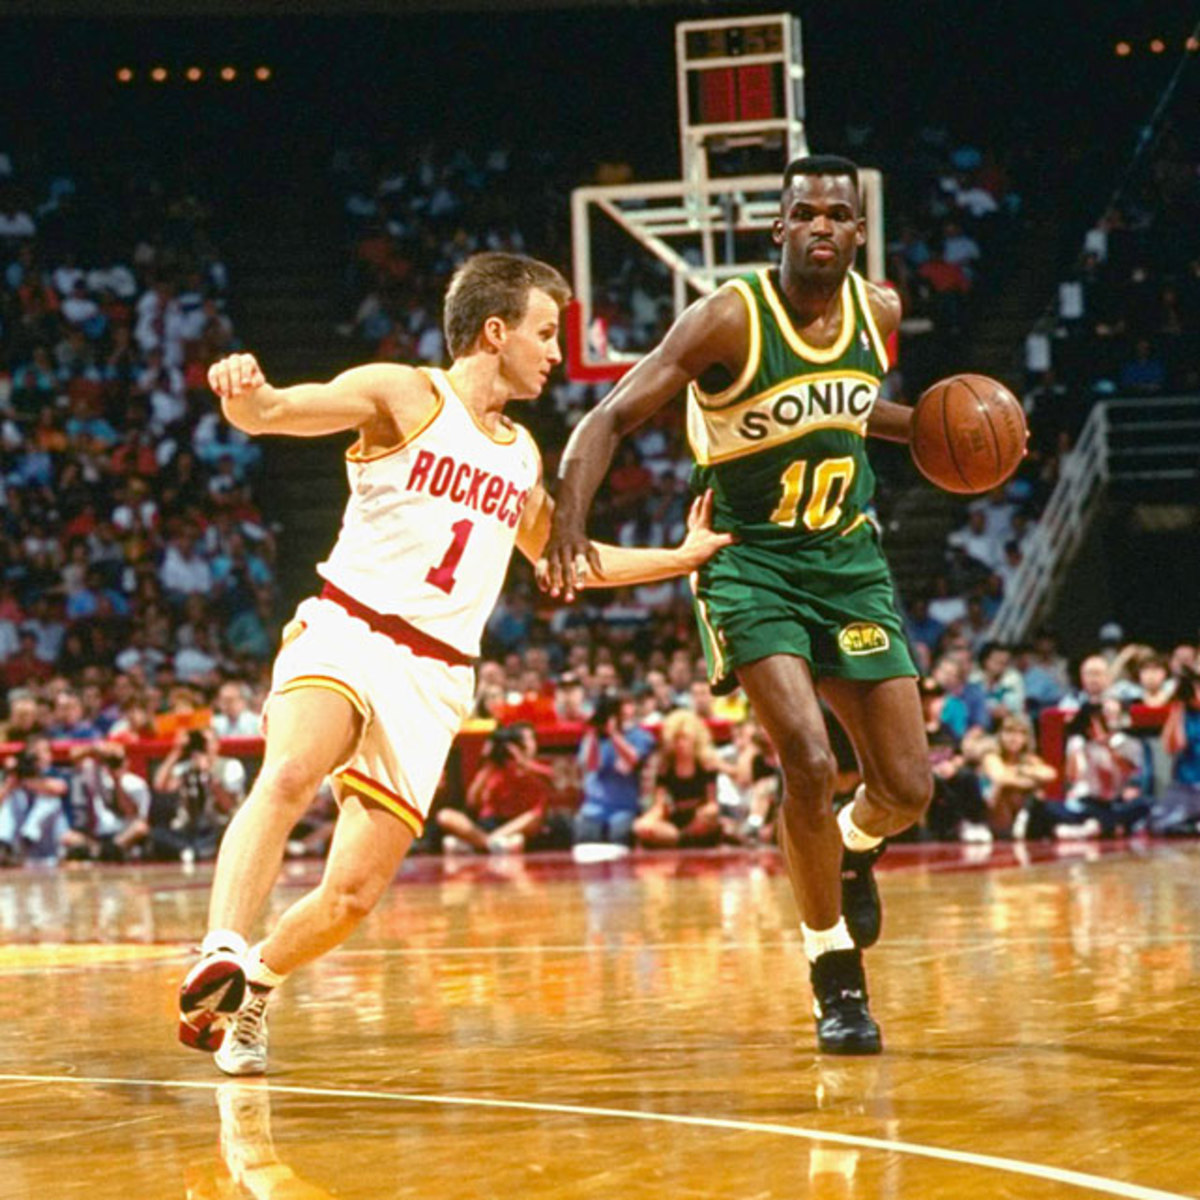 Photo of the Day] #21: Automatic Alley-Oops. Seattle Sonics